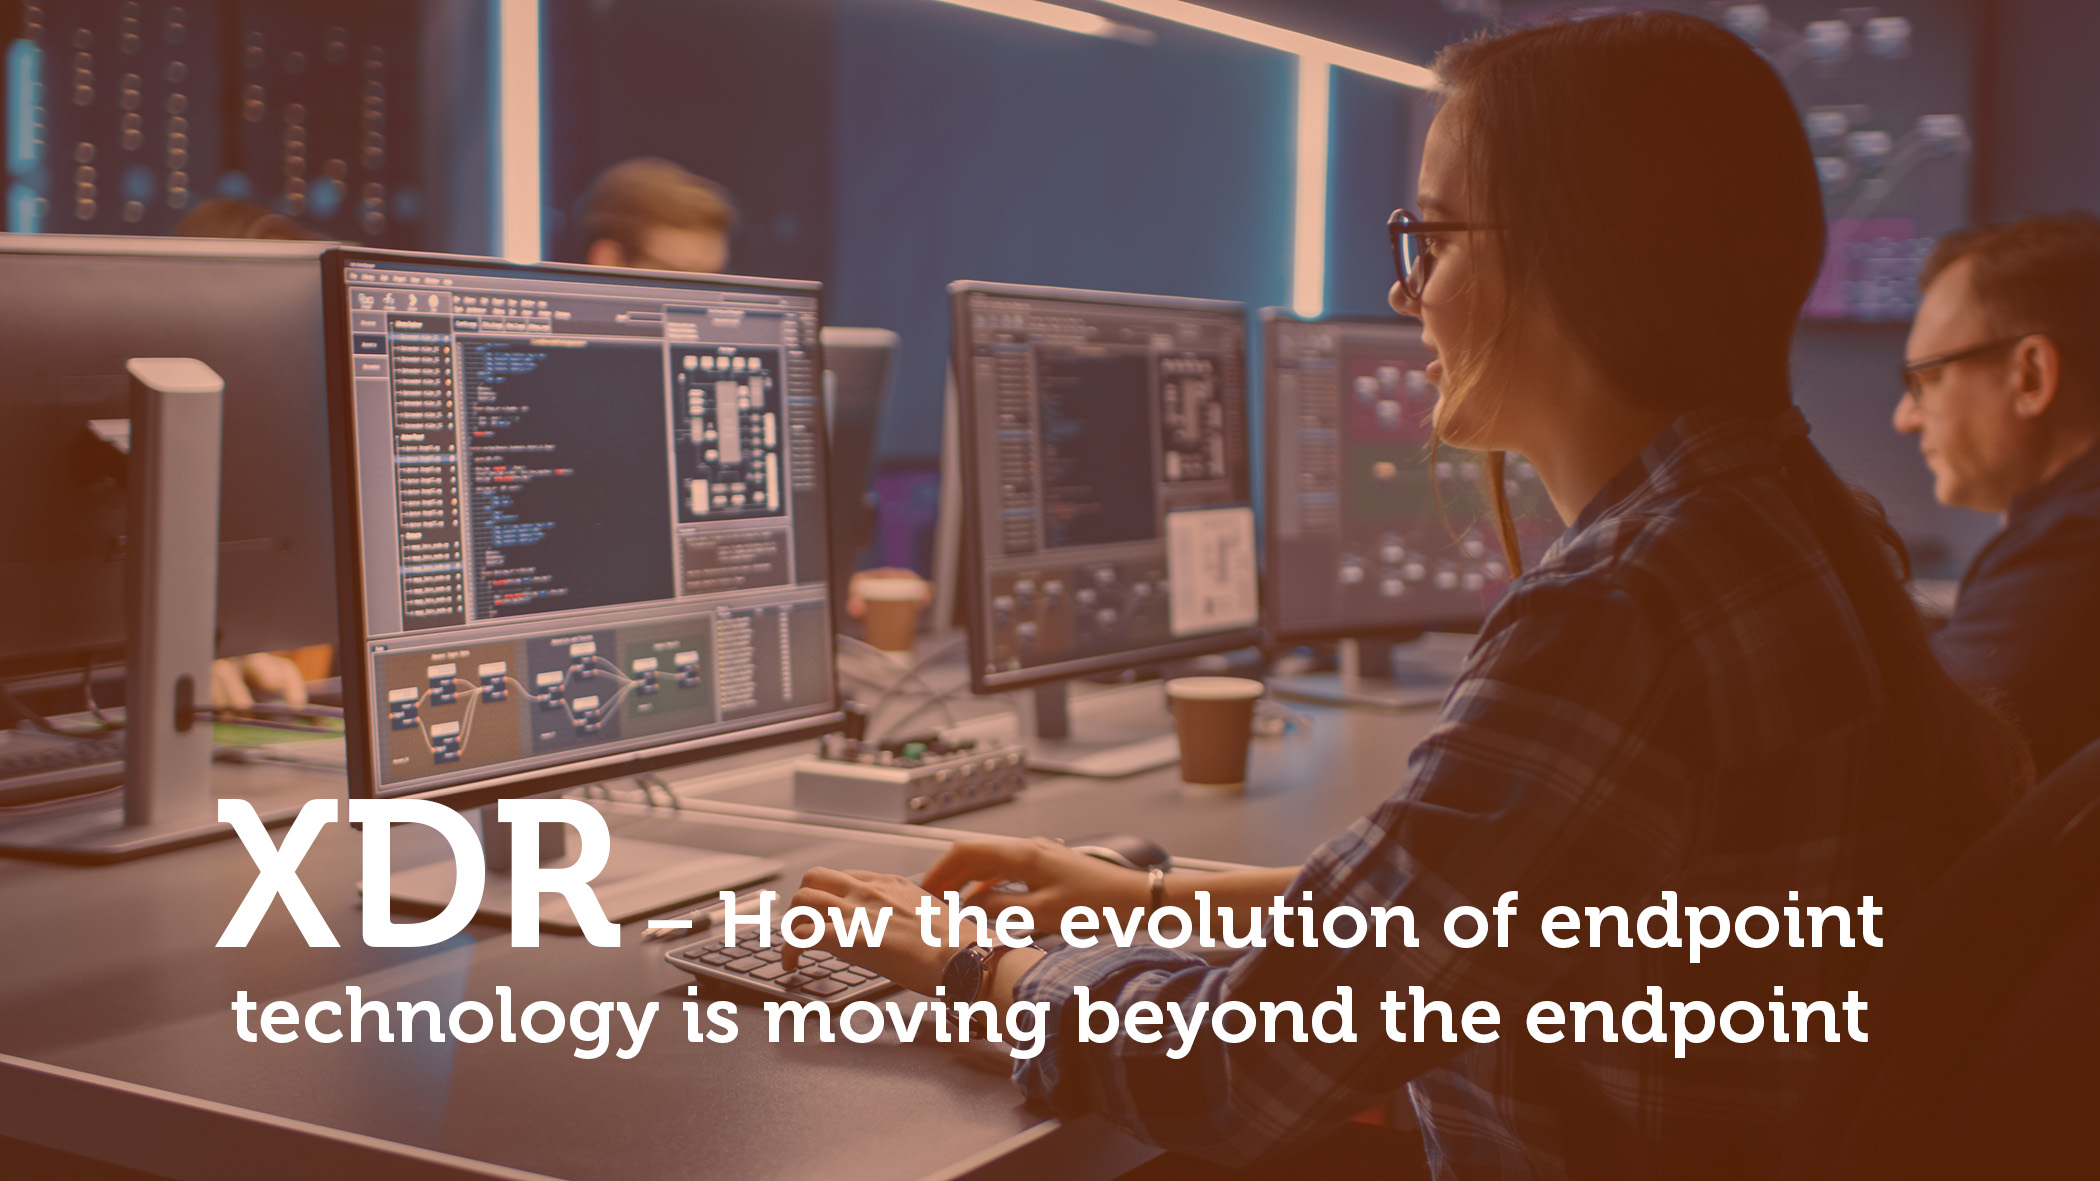 XDR – How the evolution of endpoint technology is moving beyond the endpoint